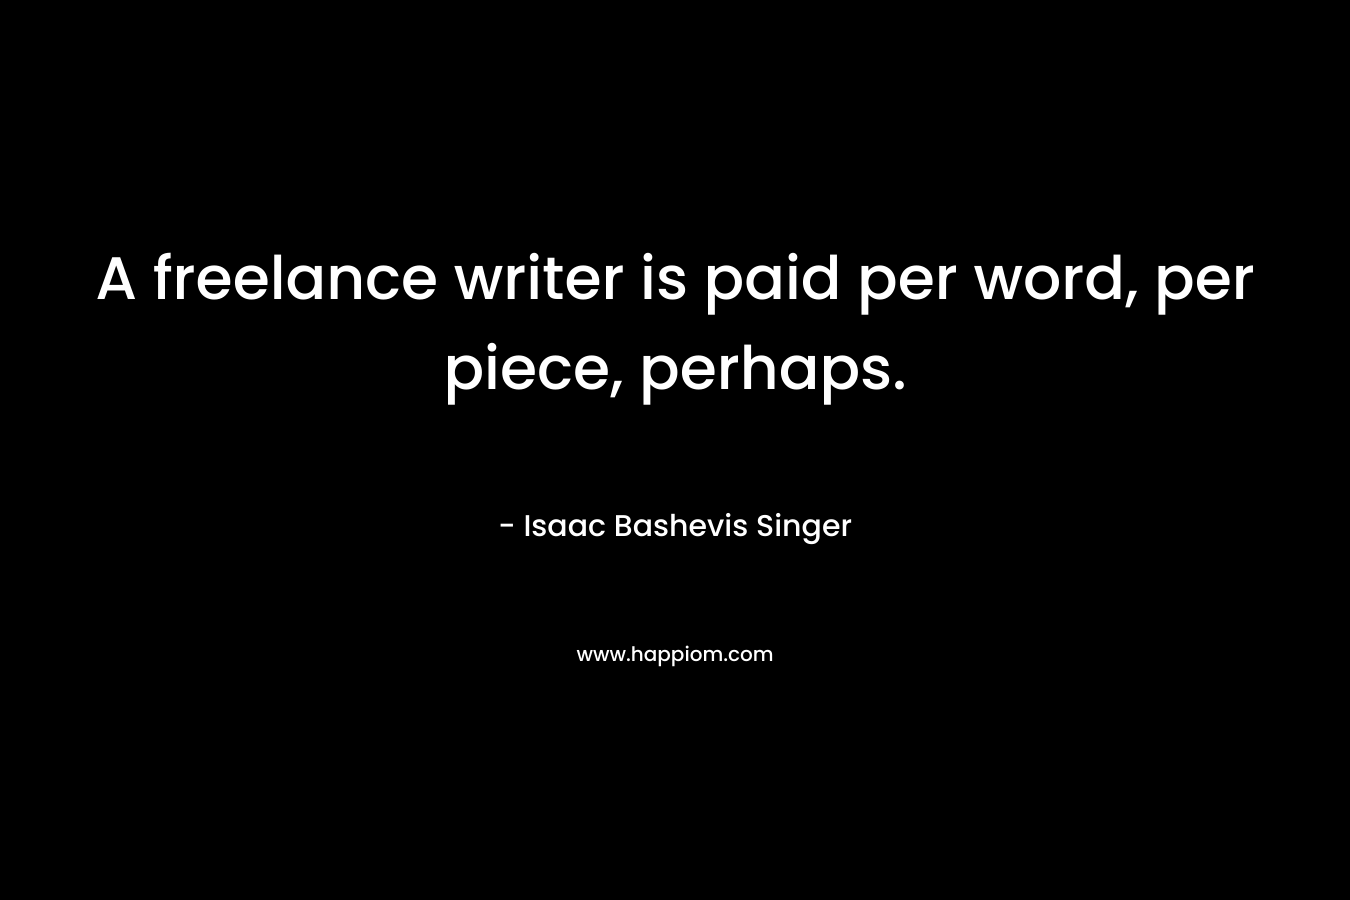 A freelance writer is paid per word, per piece, perhaps.